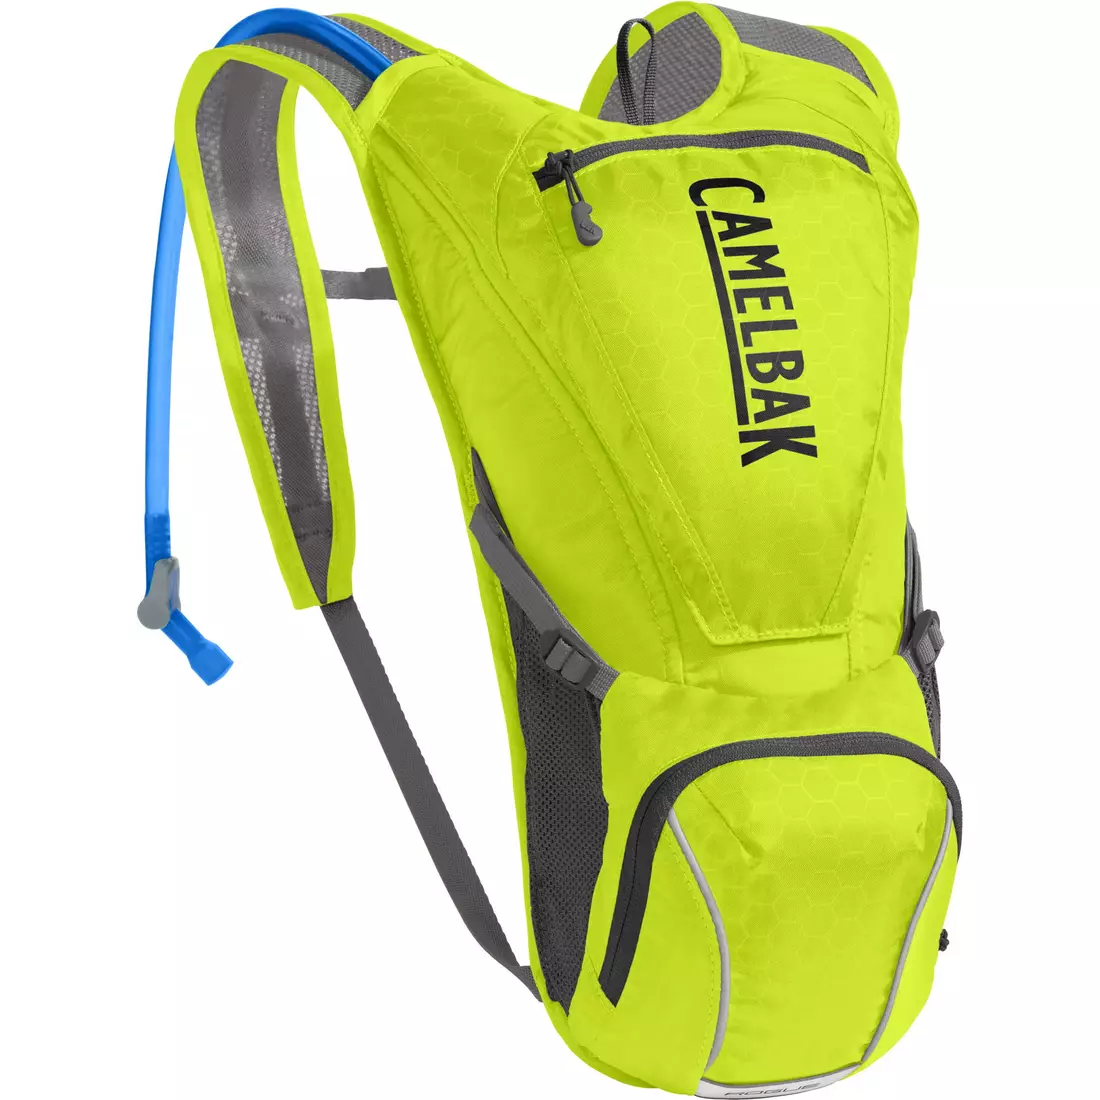 Camelbak SS18 backpack with water bladder Rogue 85oz/ 2.5L Lime Punch/Silver 1120301900